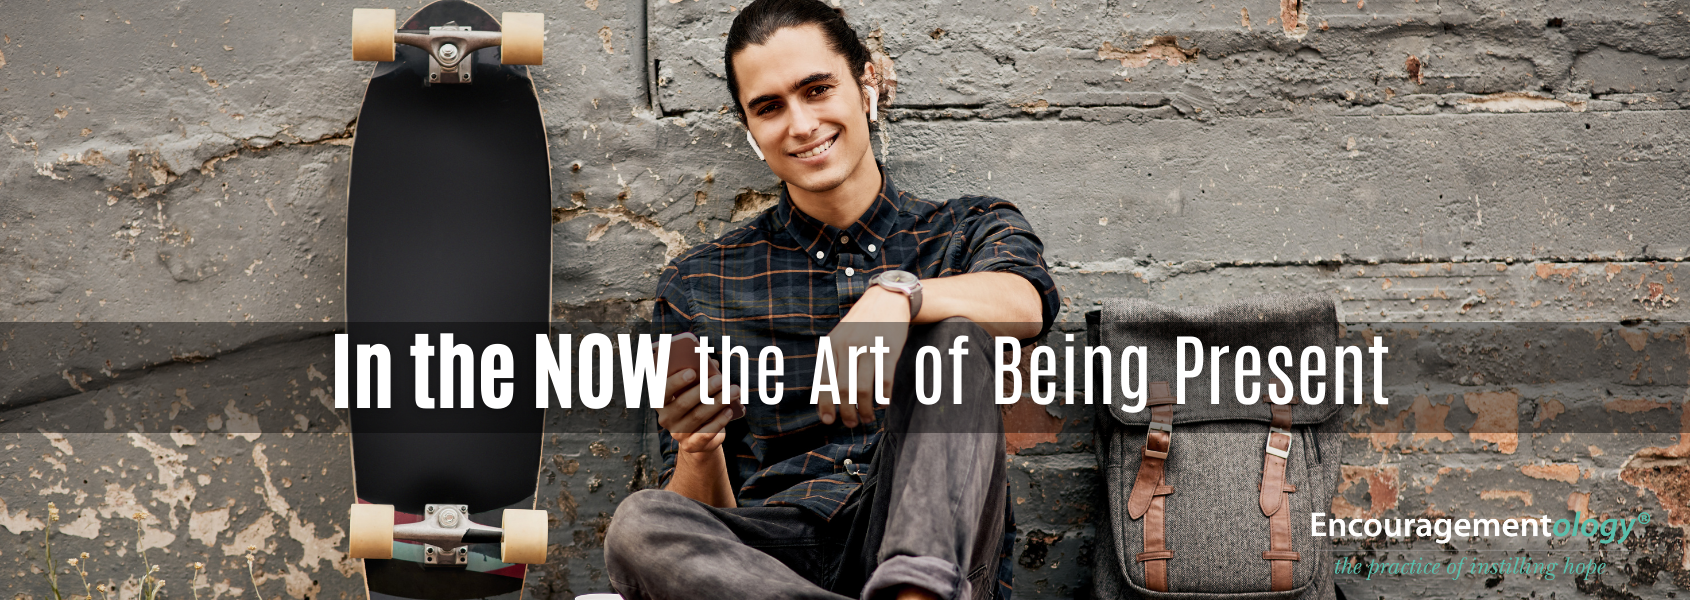 In the Now the art of being present